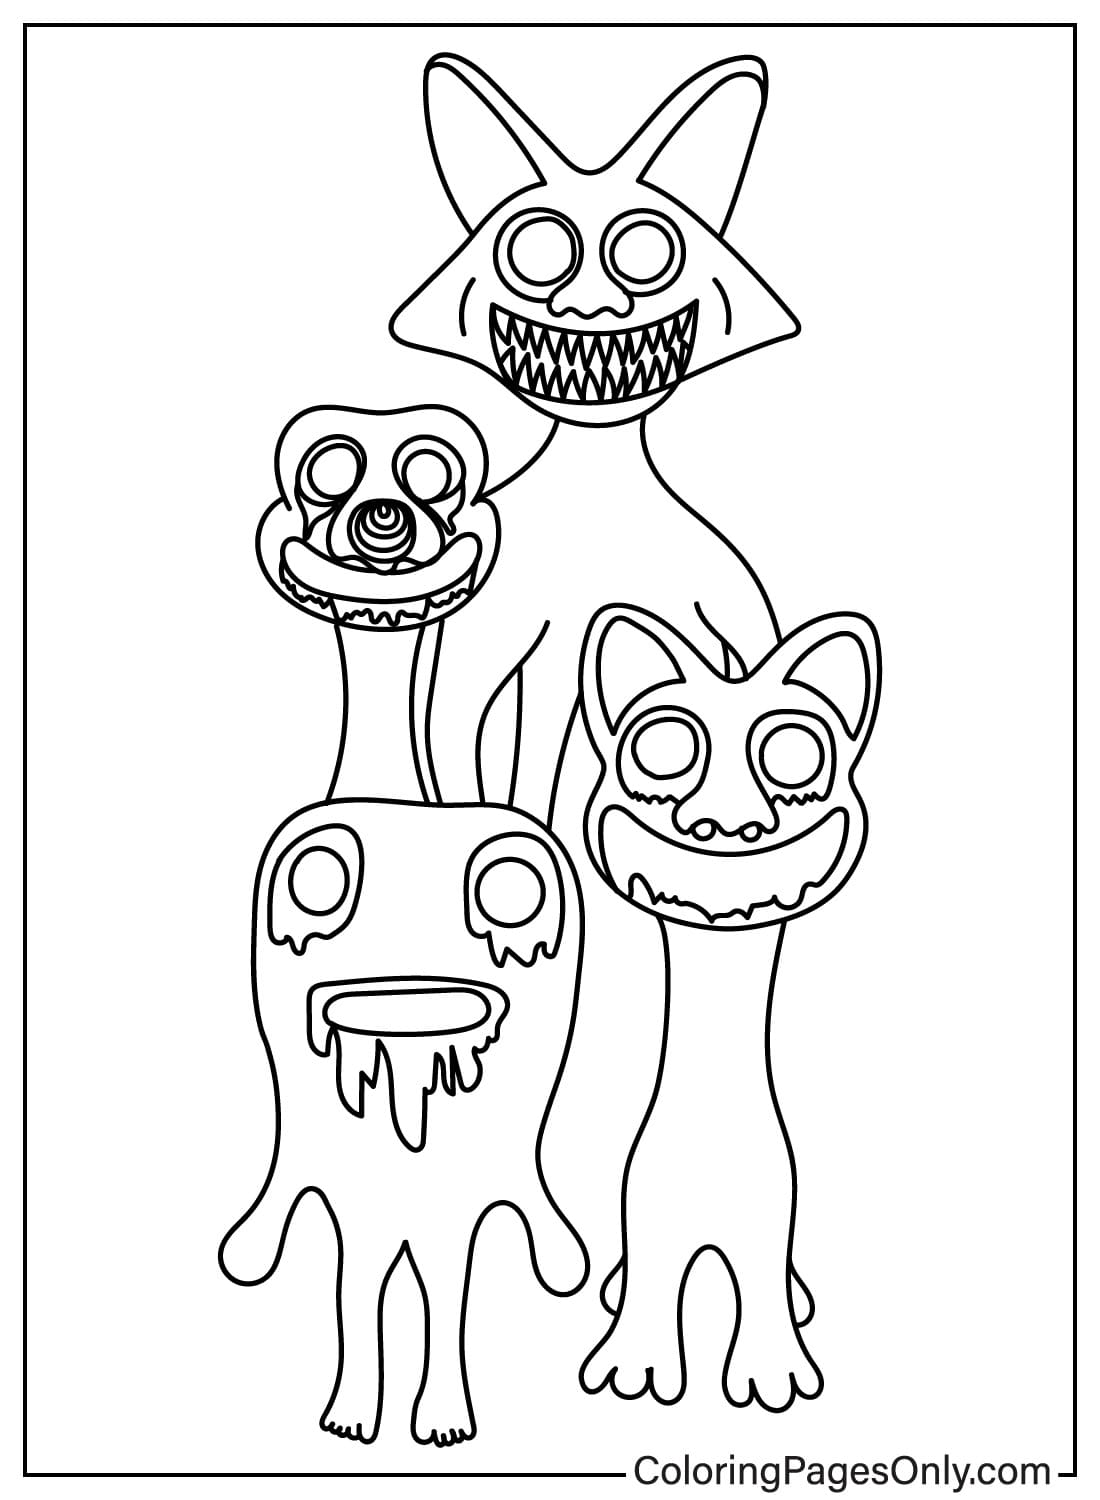 Zoonomaly Drawing Coloring Page - Free Printable Coloring Pages